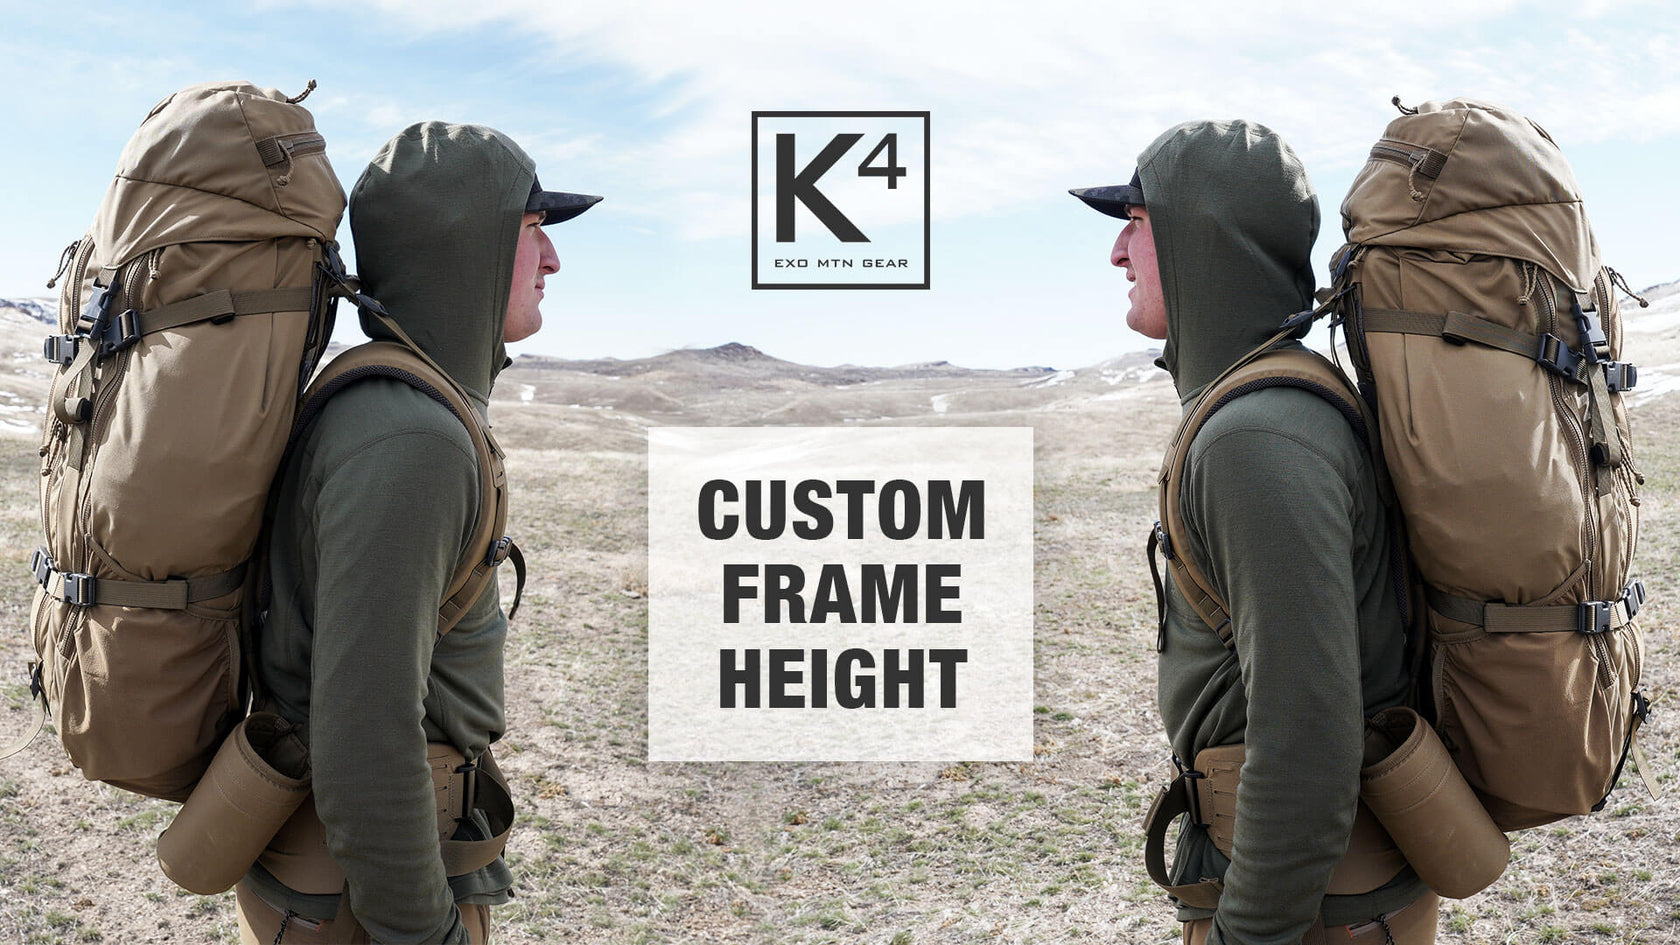 How To Customize The K4 Frame Height – Exo Mtn Gear